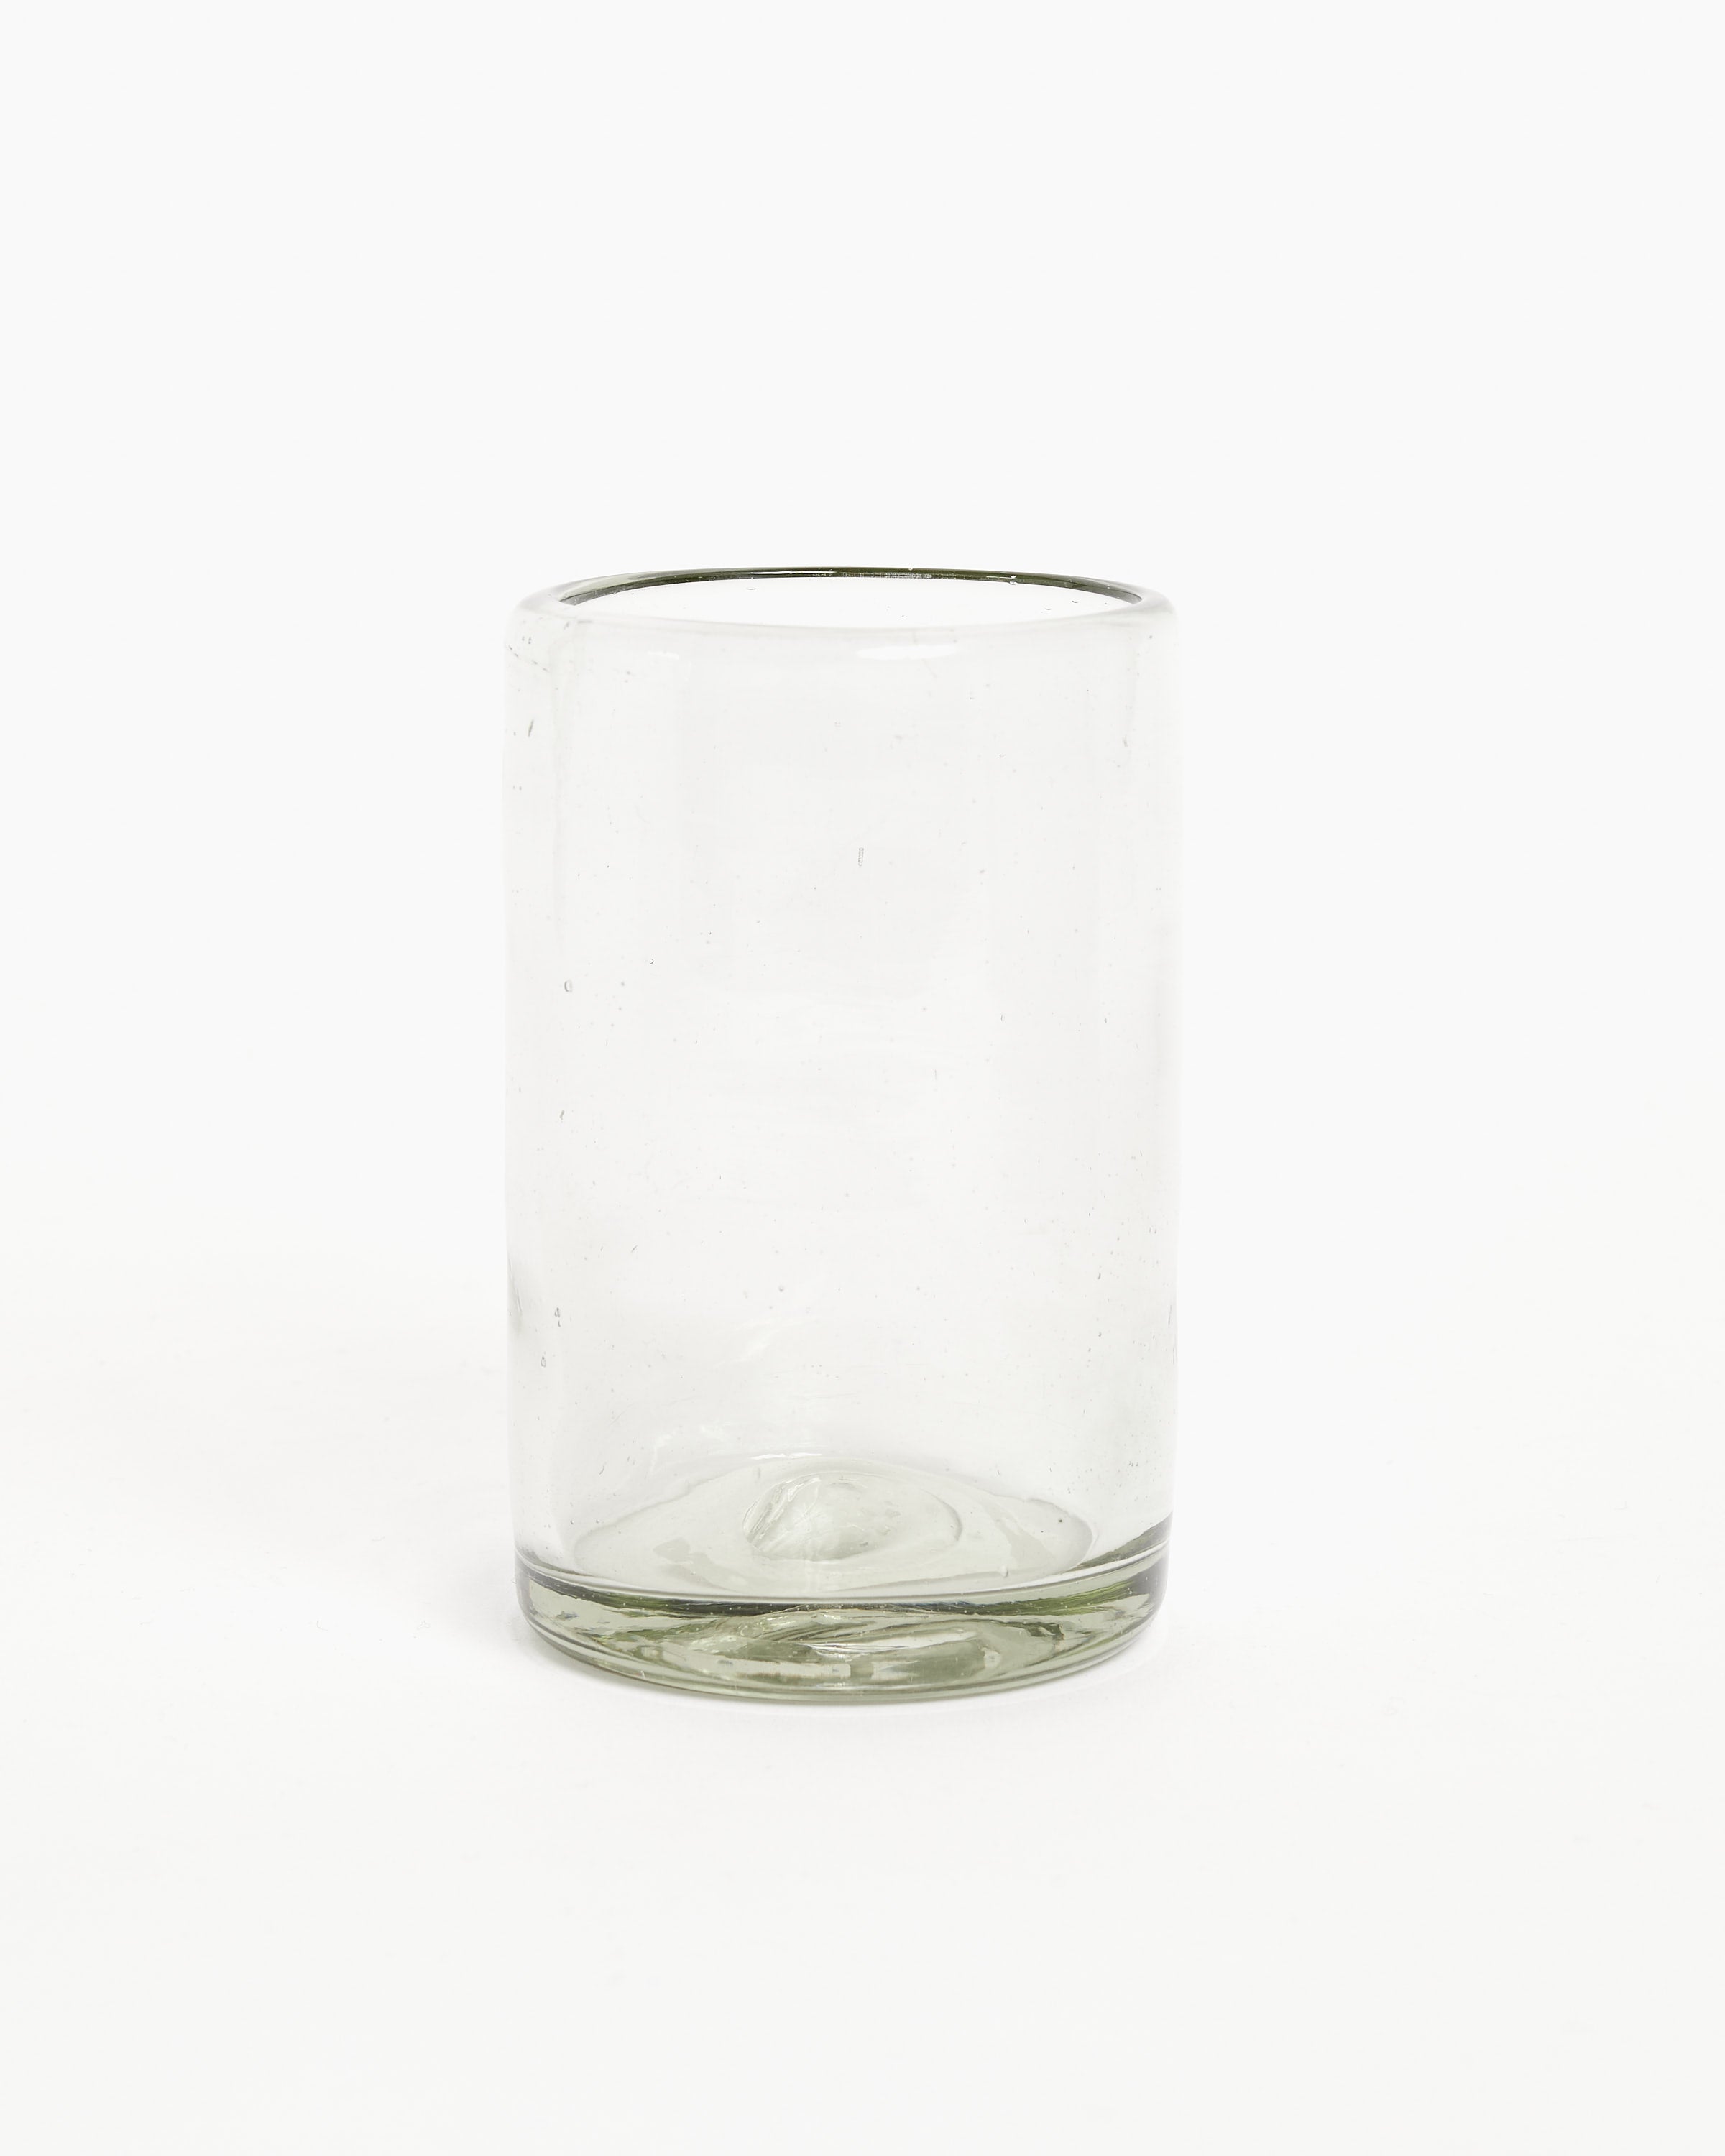 Vase Ampoule - La Soufflerie - Hand blown from recycled glass